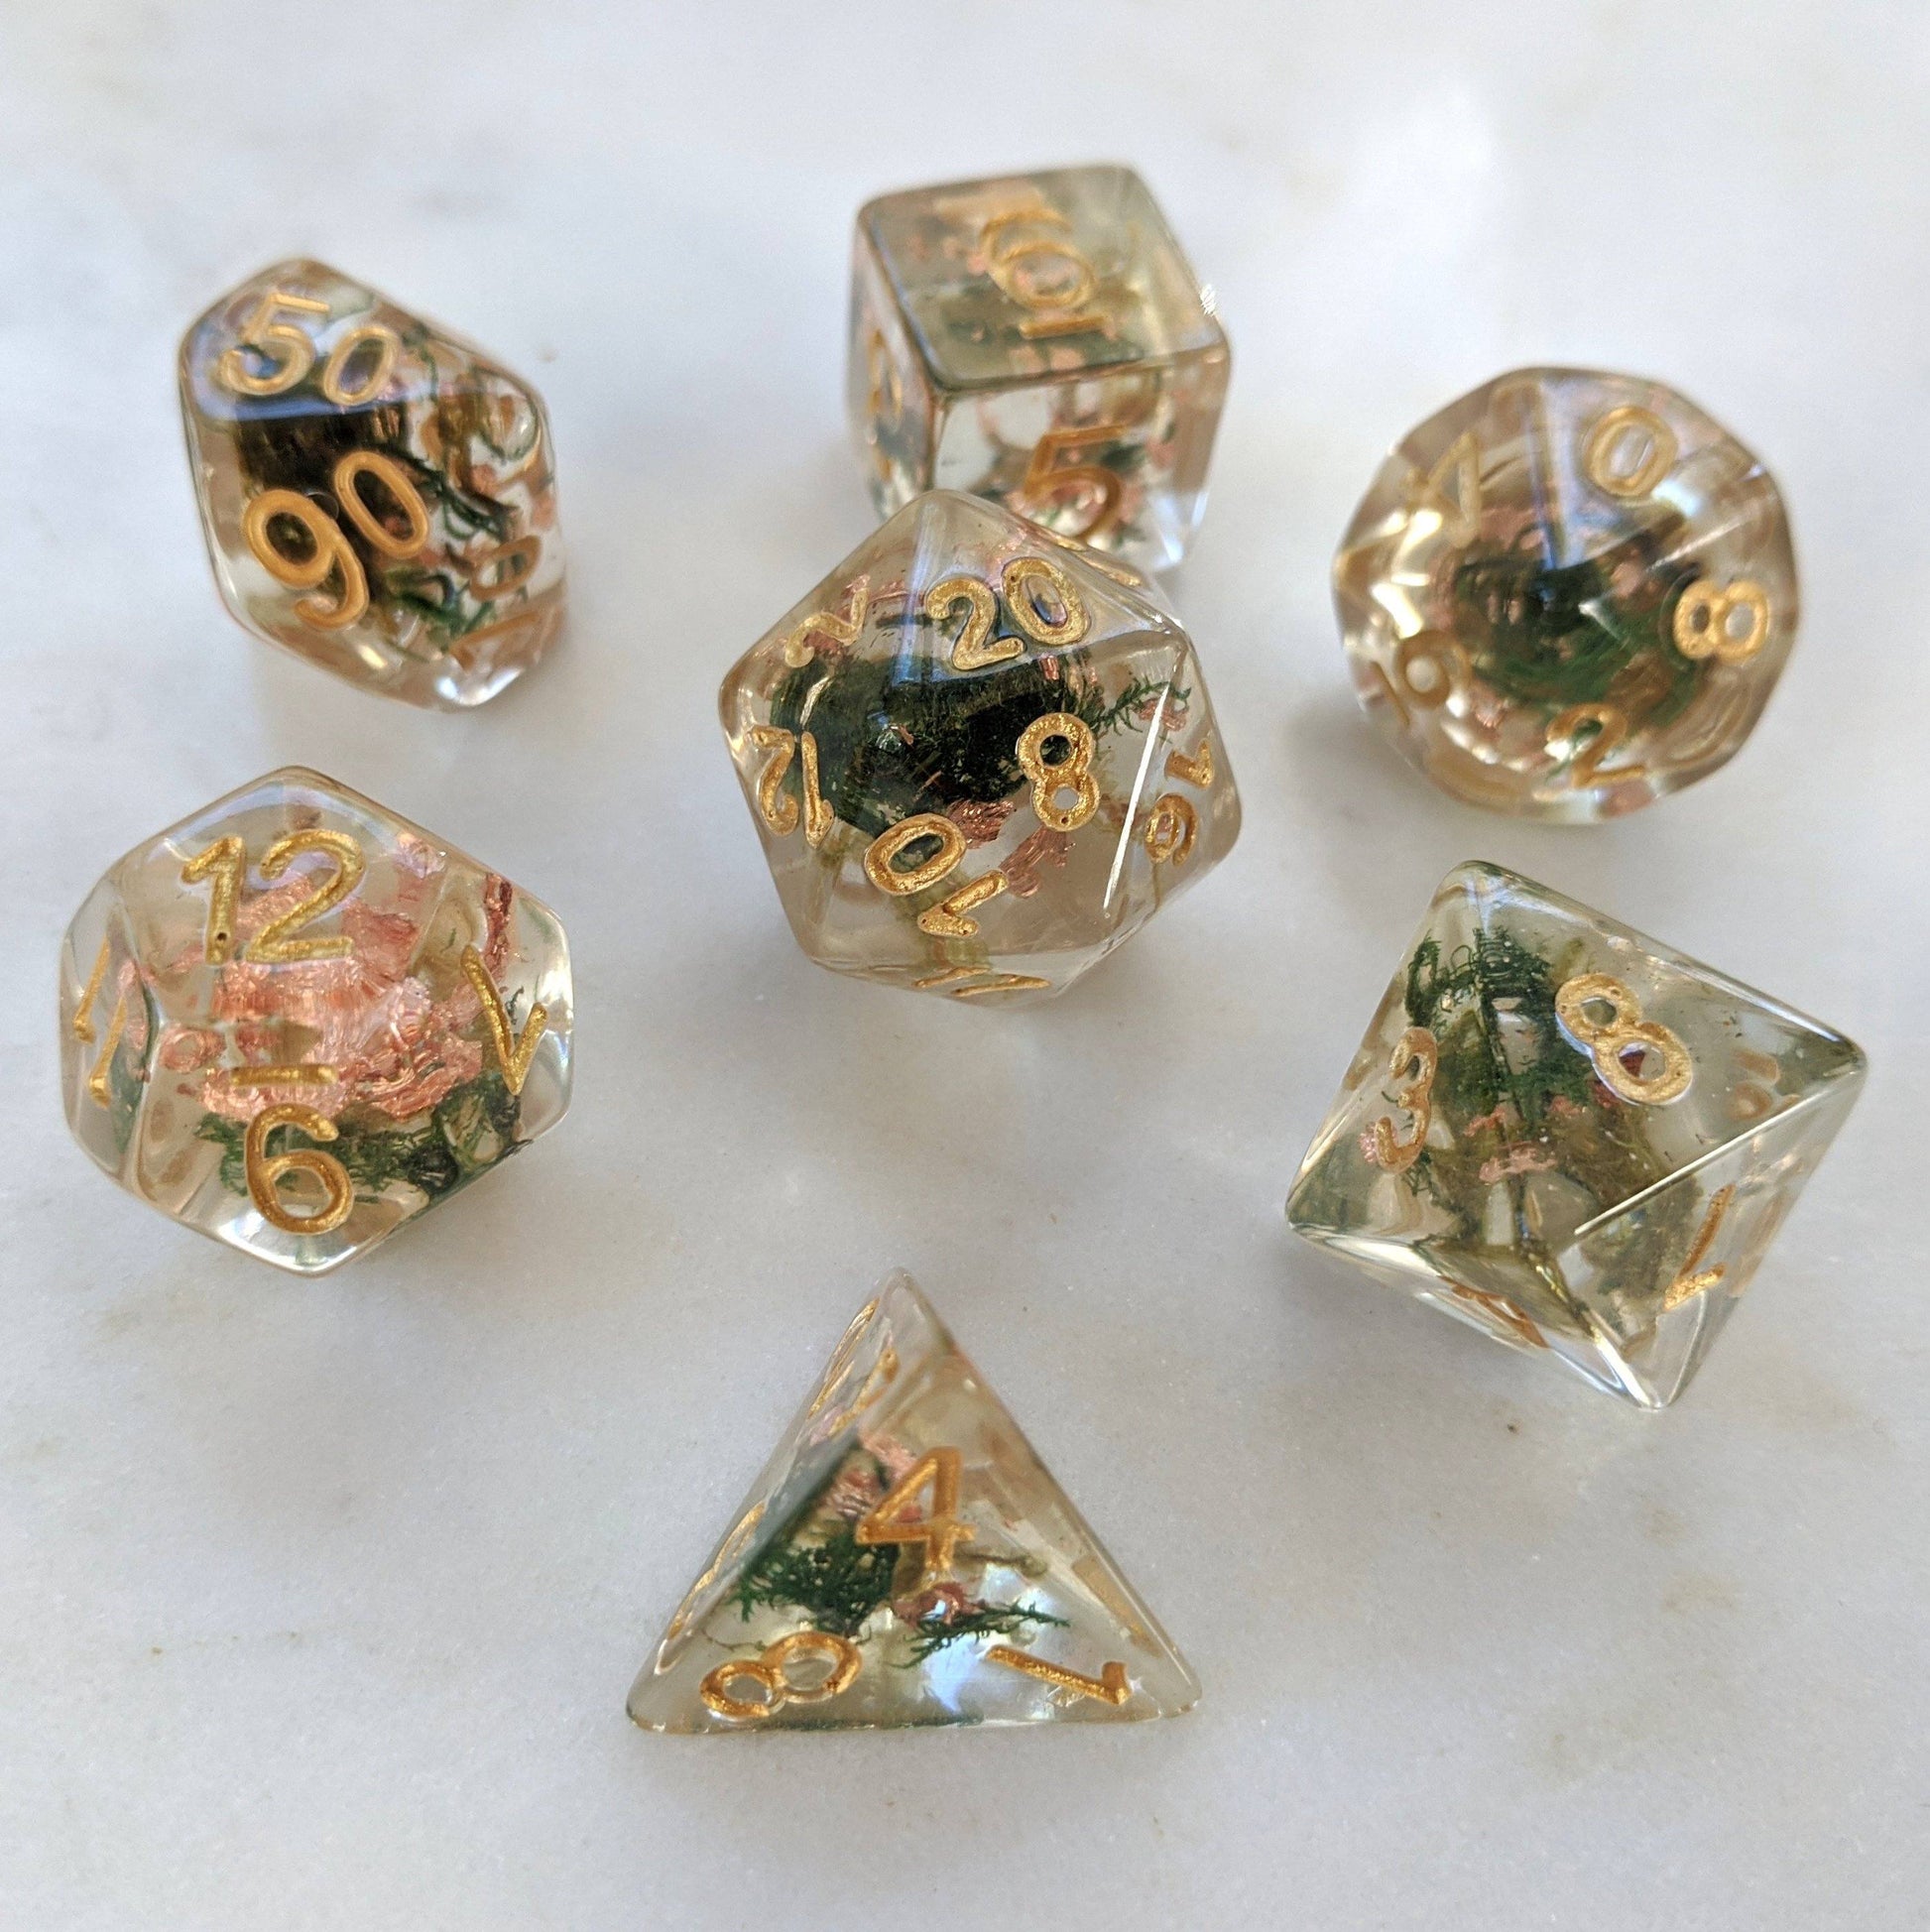 Moss and Copper Dice Set, Translucent Resin Dice with Real Moss and Copper Foil - CozyGamer